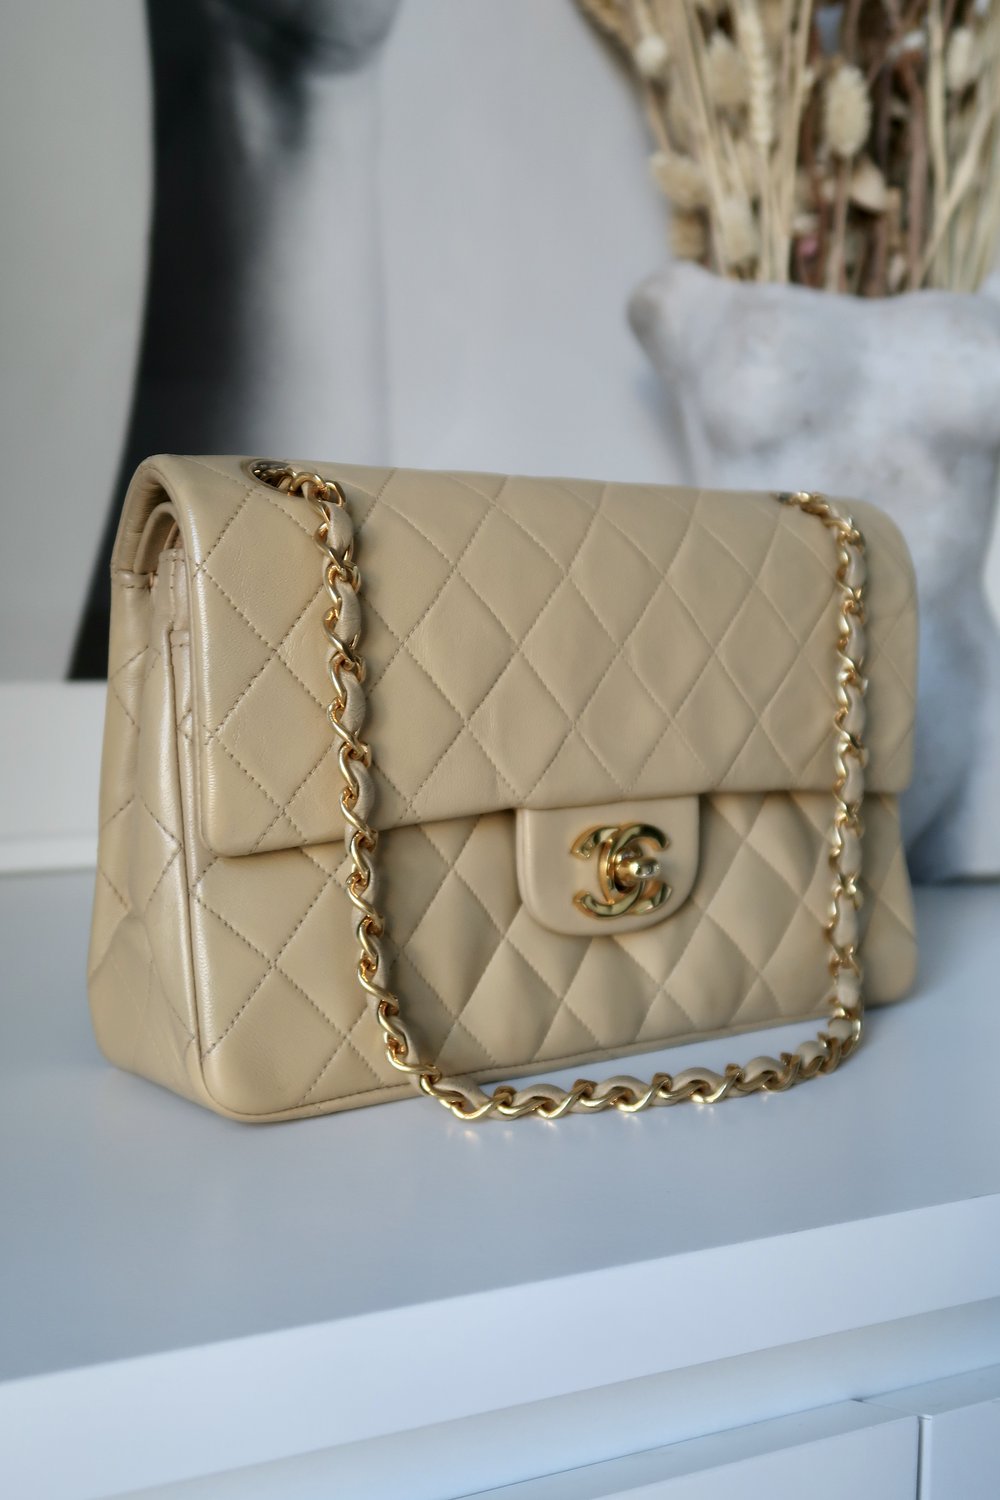 1988 Chanel - 53 For Sale on 1stDibs  chanel 1988 collection, chanel 88,  1988 chanel bag